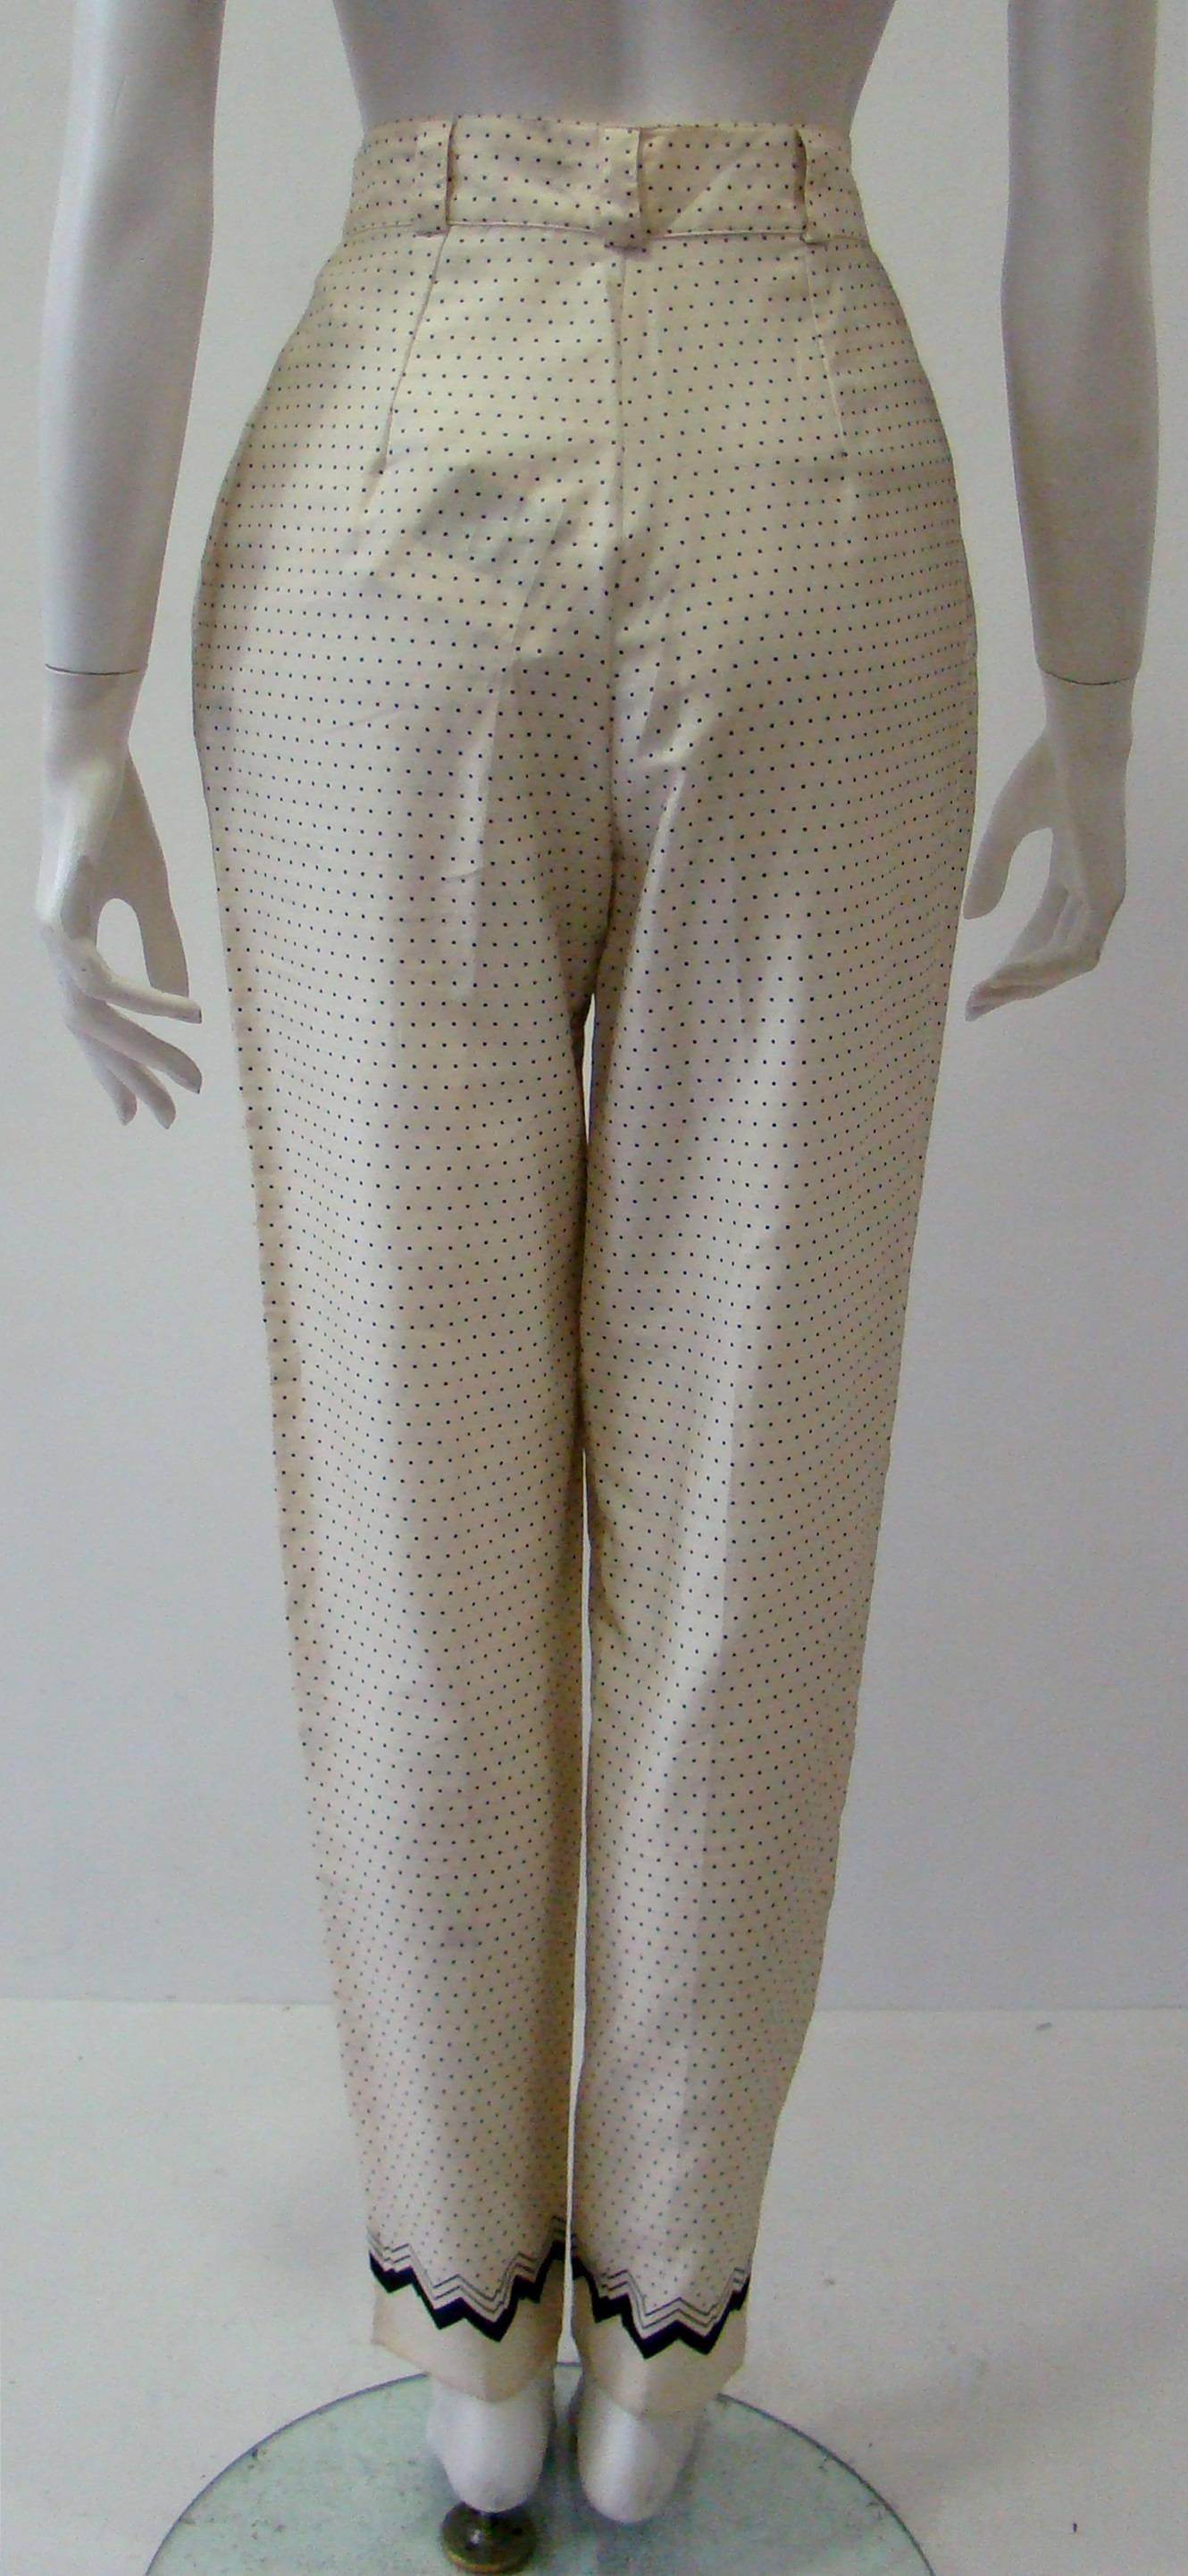 Early Gianni Versace Polka Dot Cotton Pants Spring 1988 For Sale 2